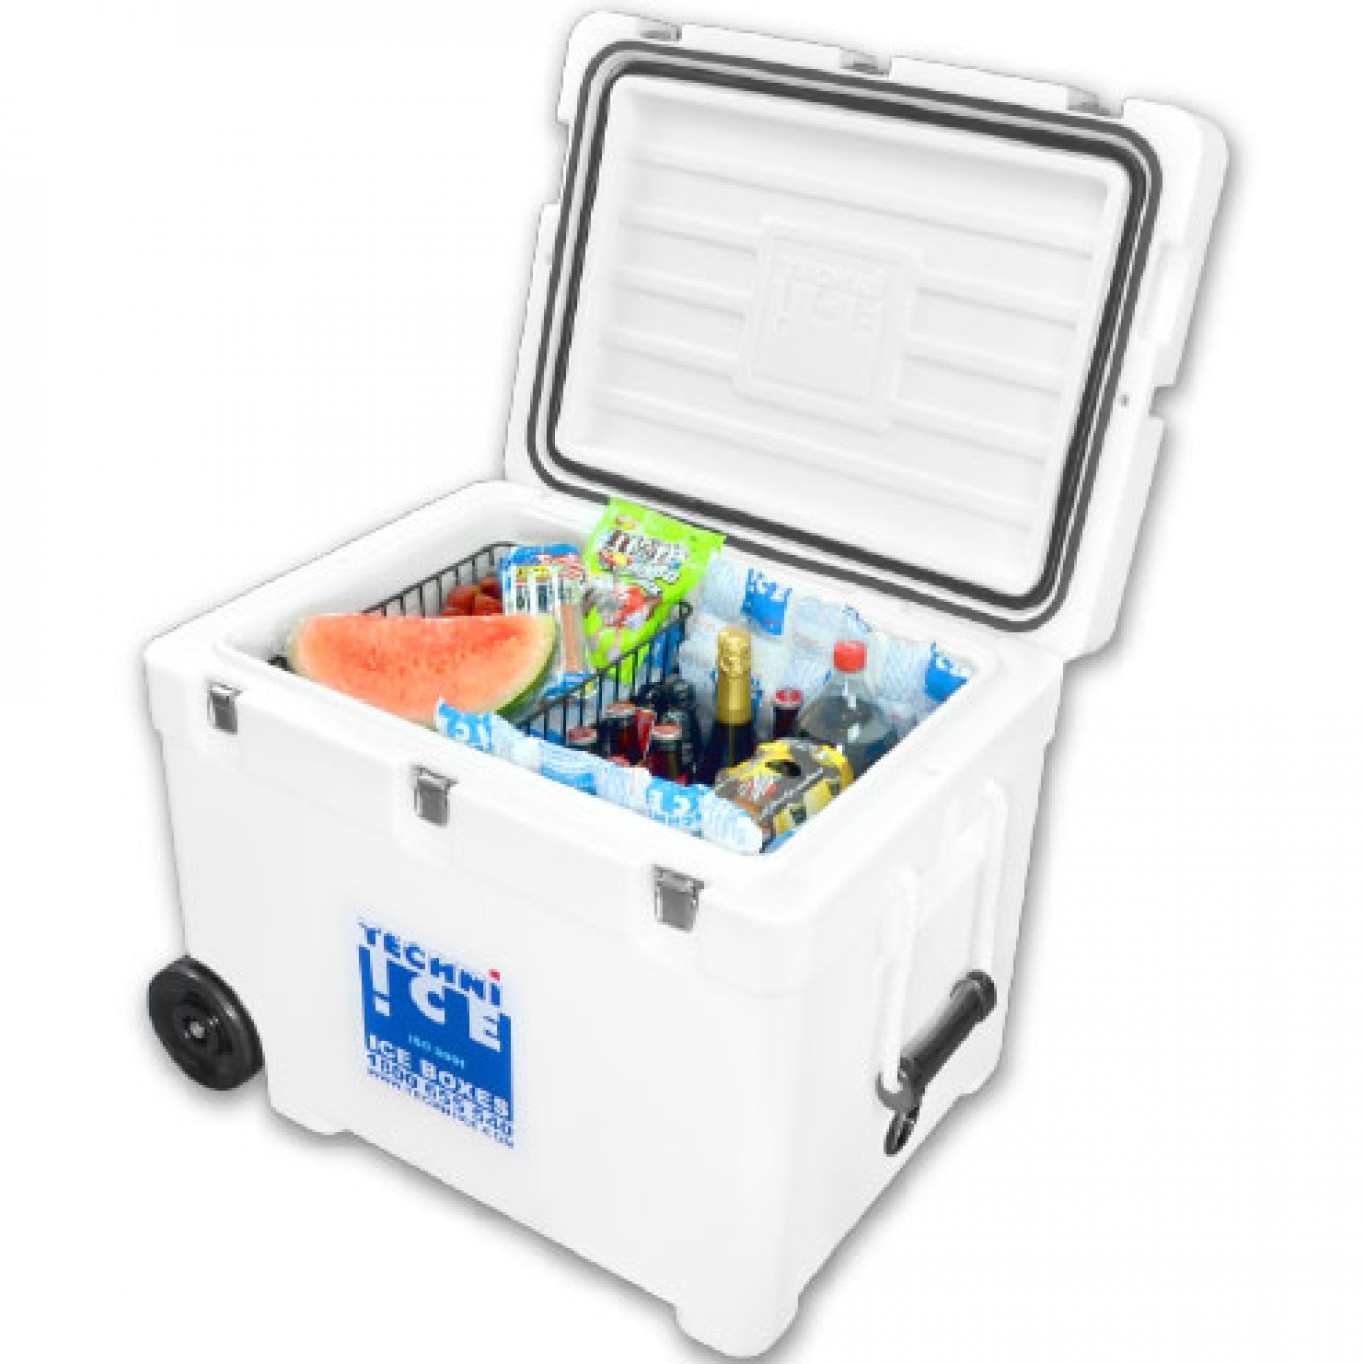 ice cooler box with wheels